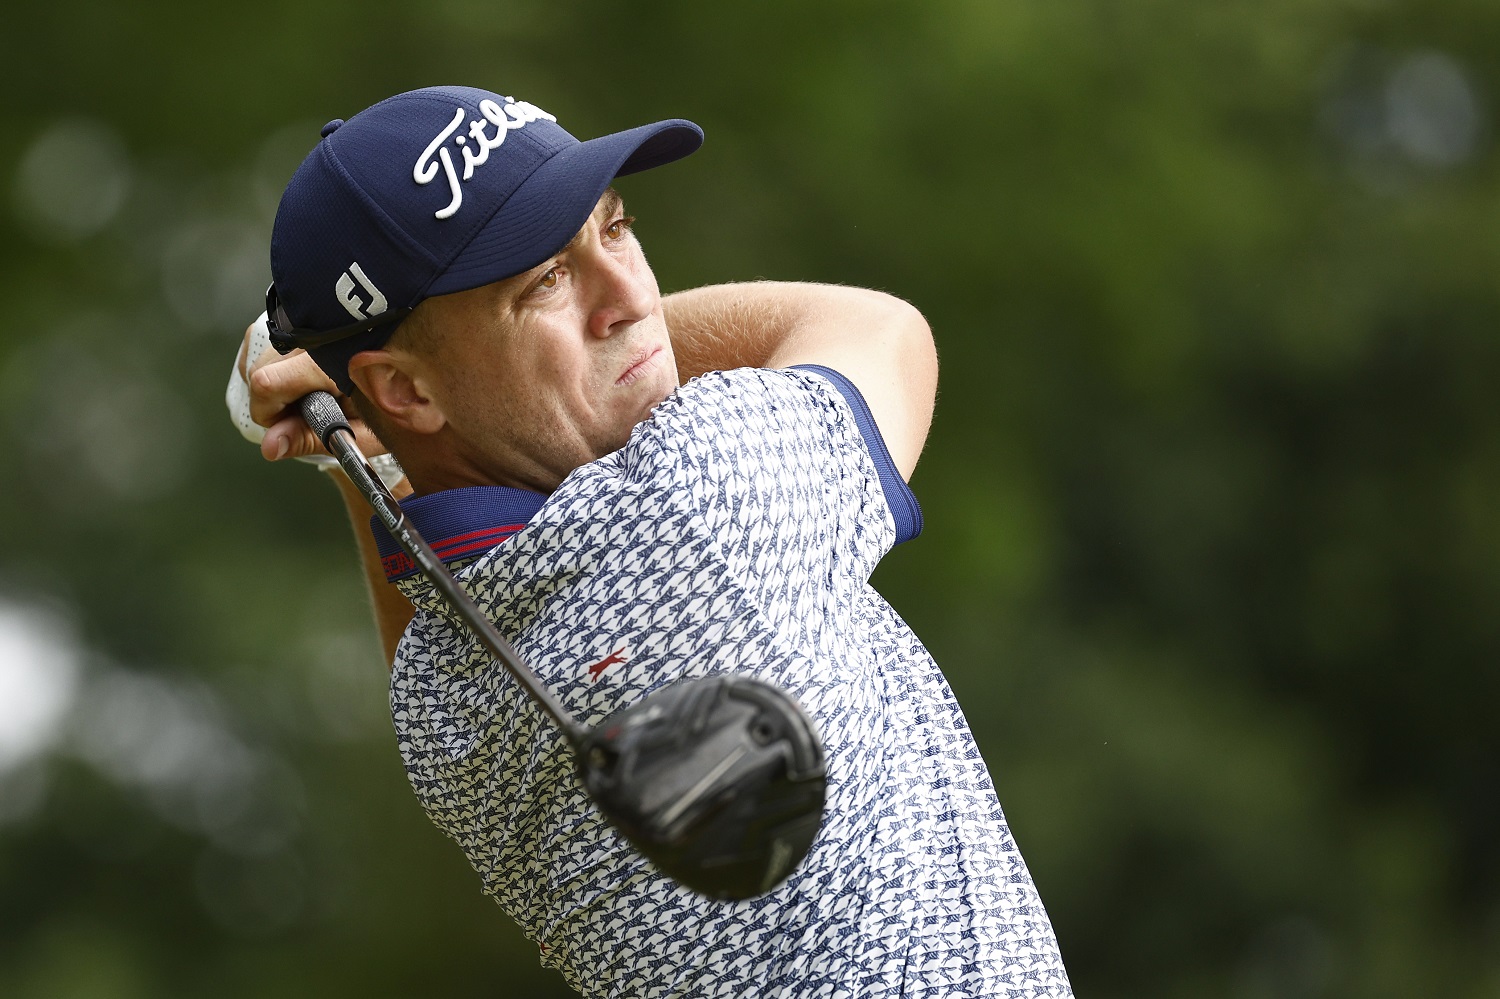 Justin Thomas plays from the 12th tee during the second round of the 122nd U.S. Open at The Country Club on June 17, 2022, in Brookline, Massachusetts.